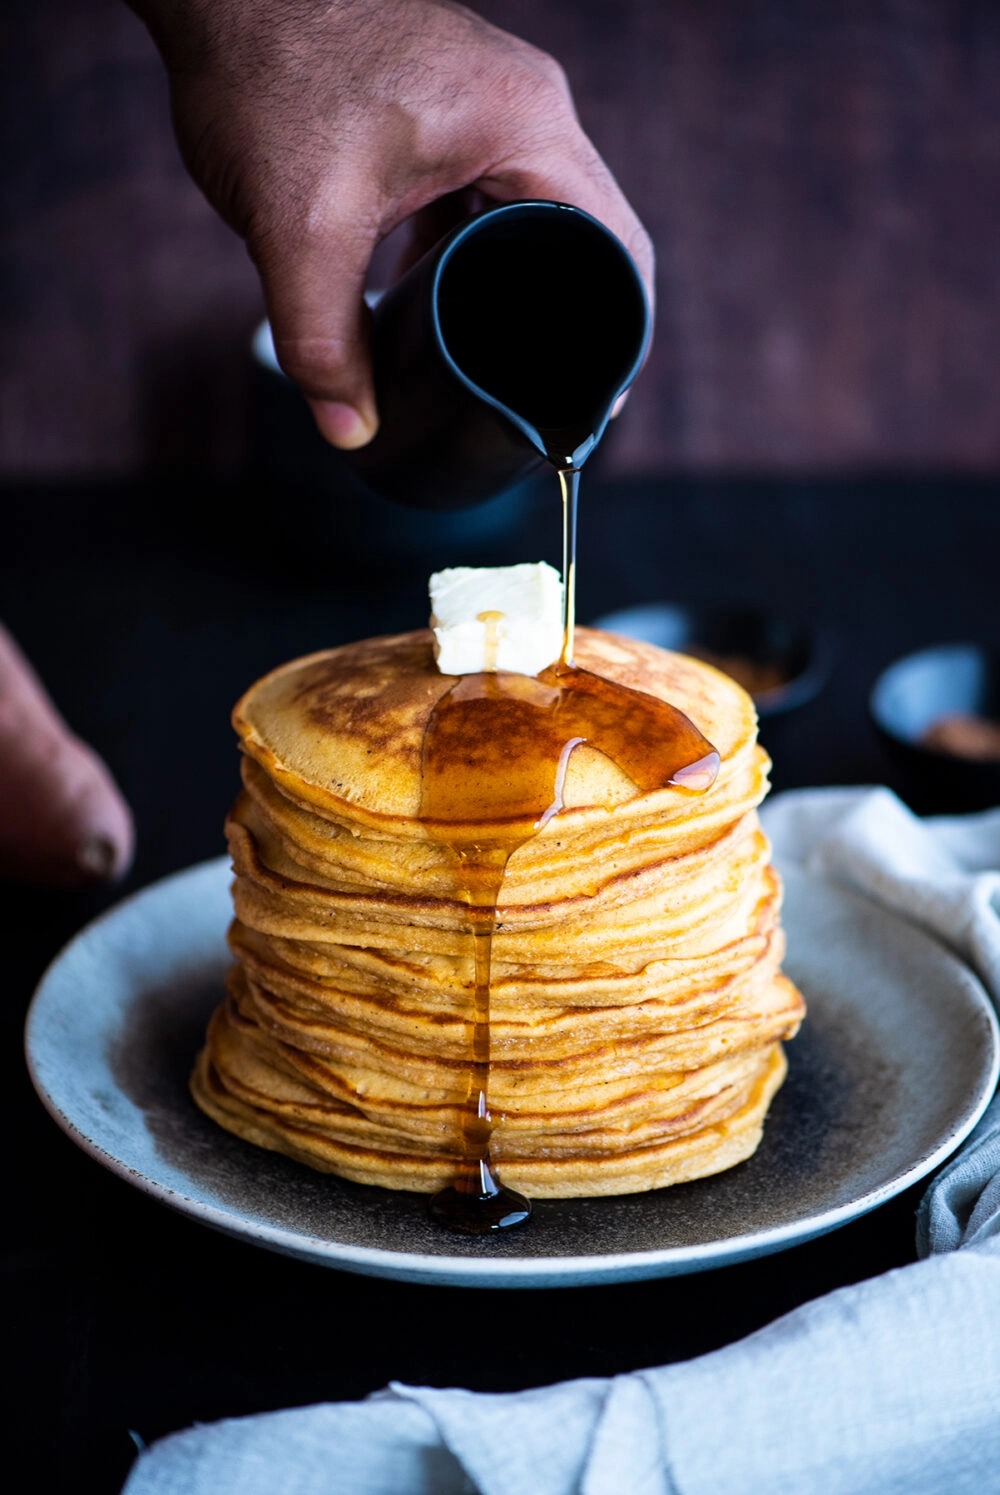 Pouring syrup on a stack of sweet potato pancakes